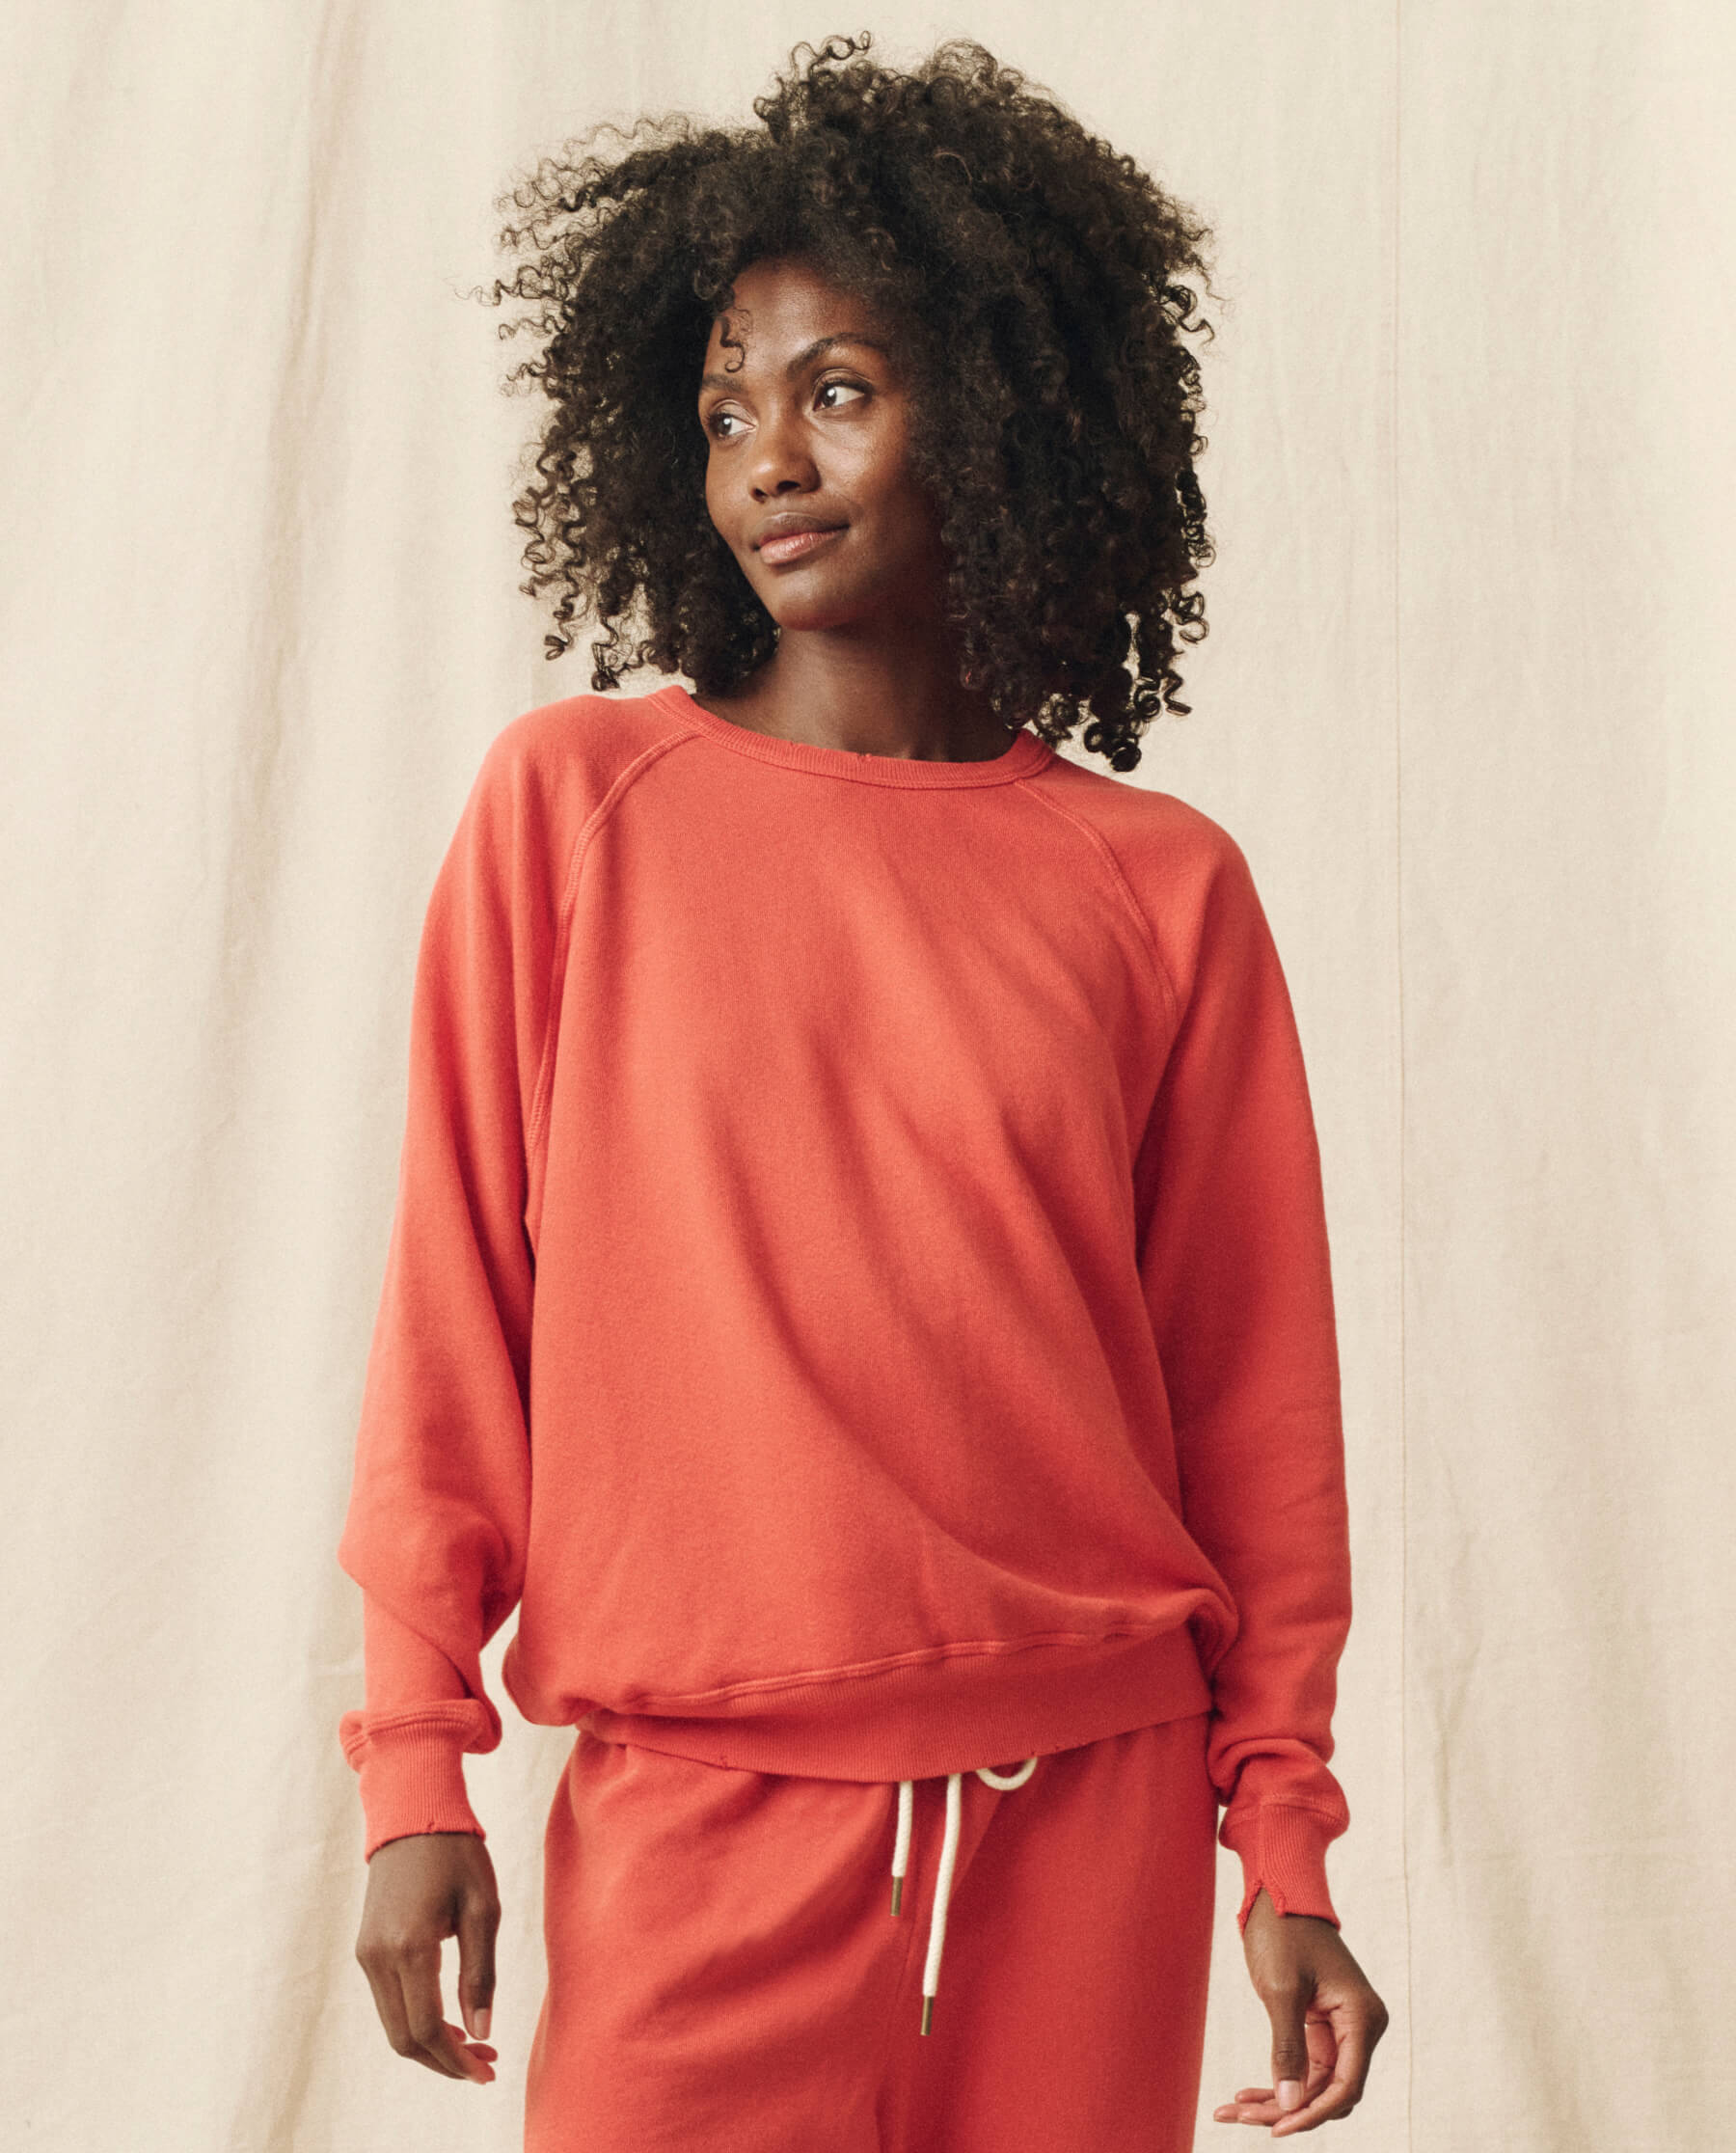 The College Sweatshirt. Solid -- Heirloom Tomato SWEATSHIRTS THE GREAT. PS24 KNITS D1